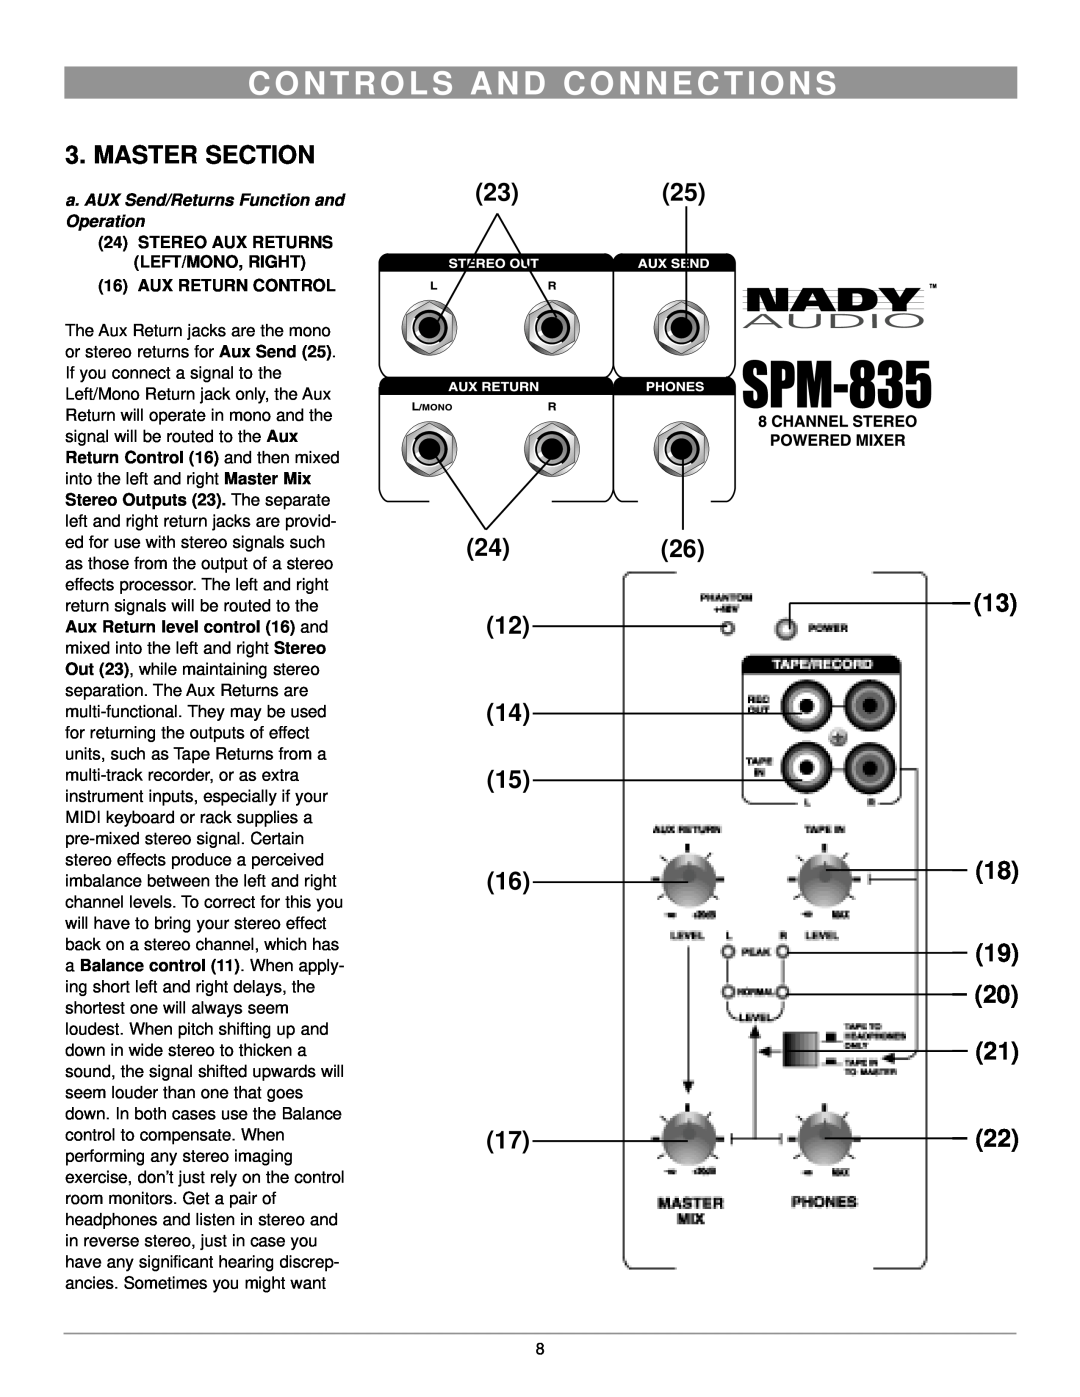 Nady Systems SPM-835 owner manual Master Section, 2325 2426, 13 18 19 20, C O N T R O L S A N D C O N N E C T I O N S 